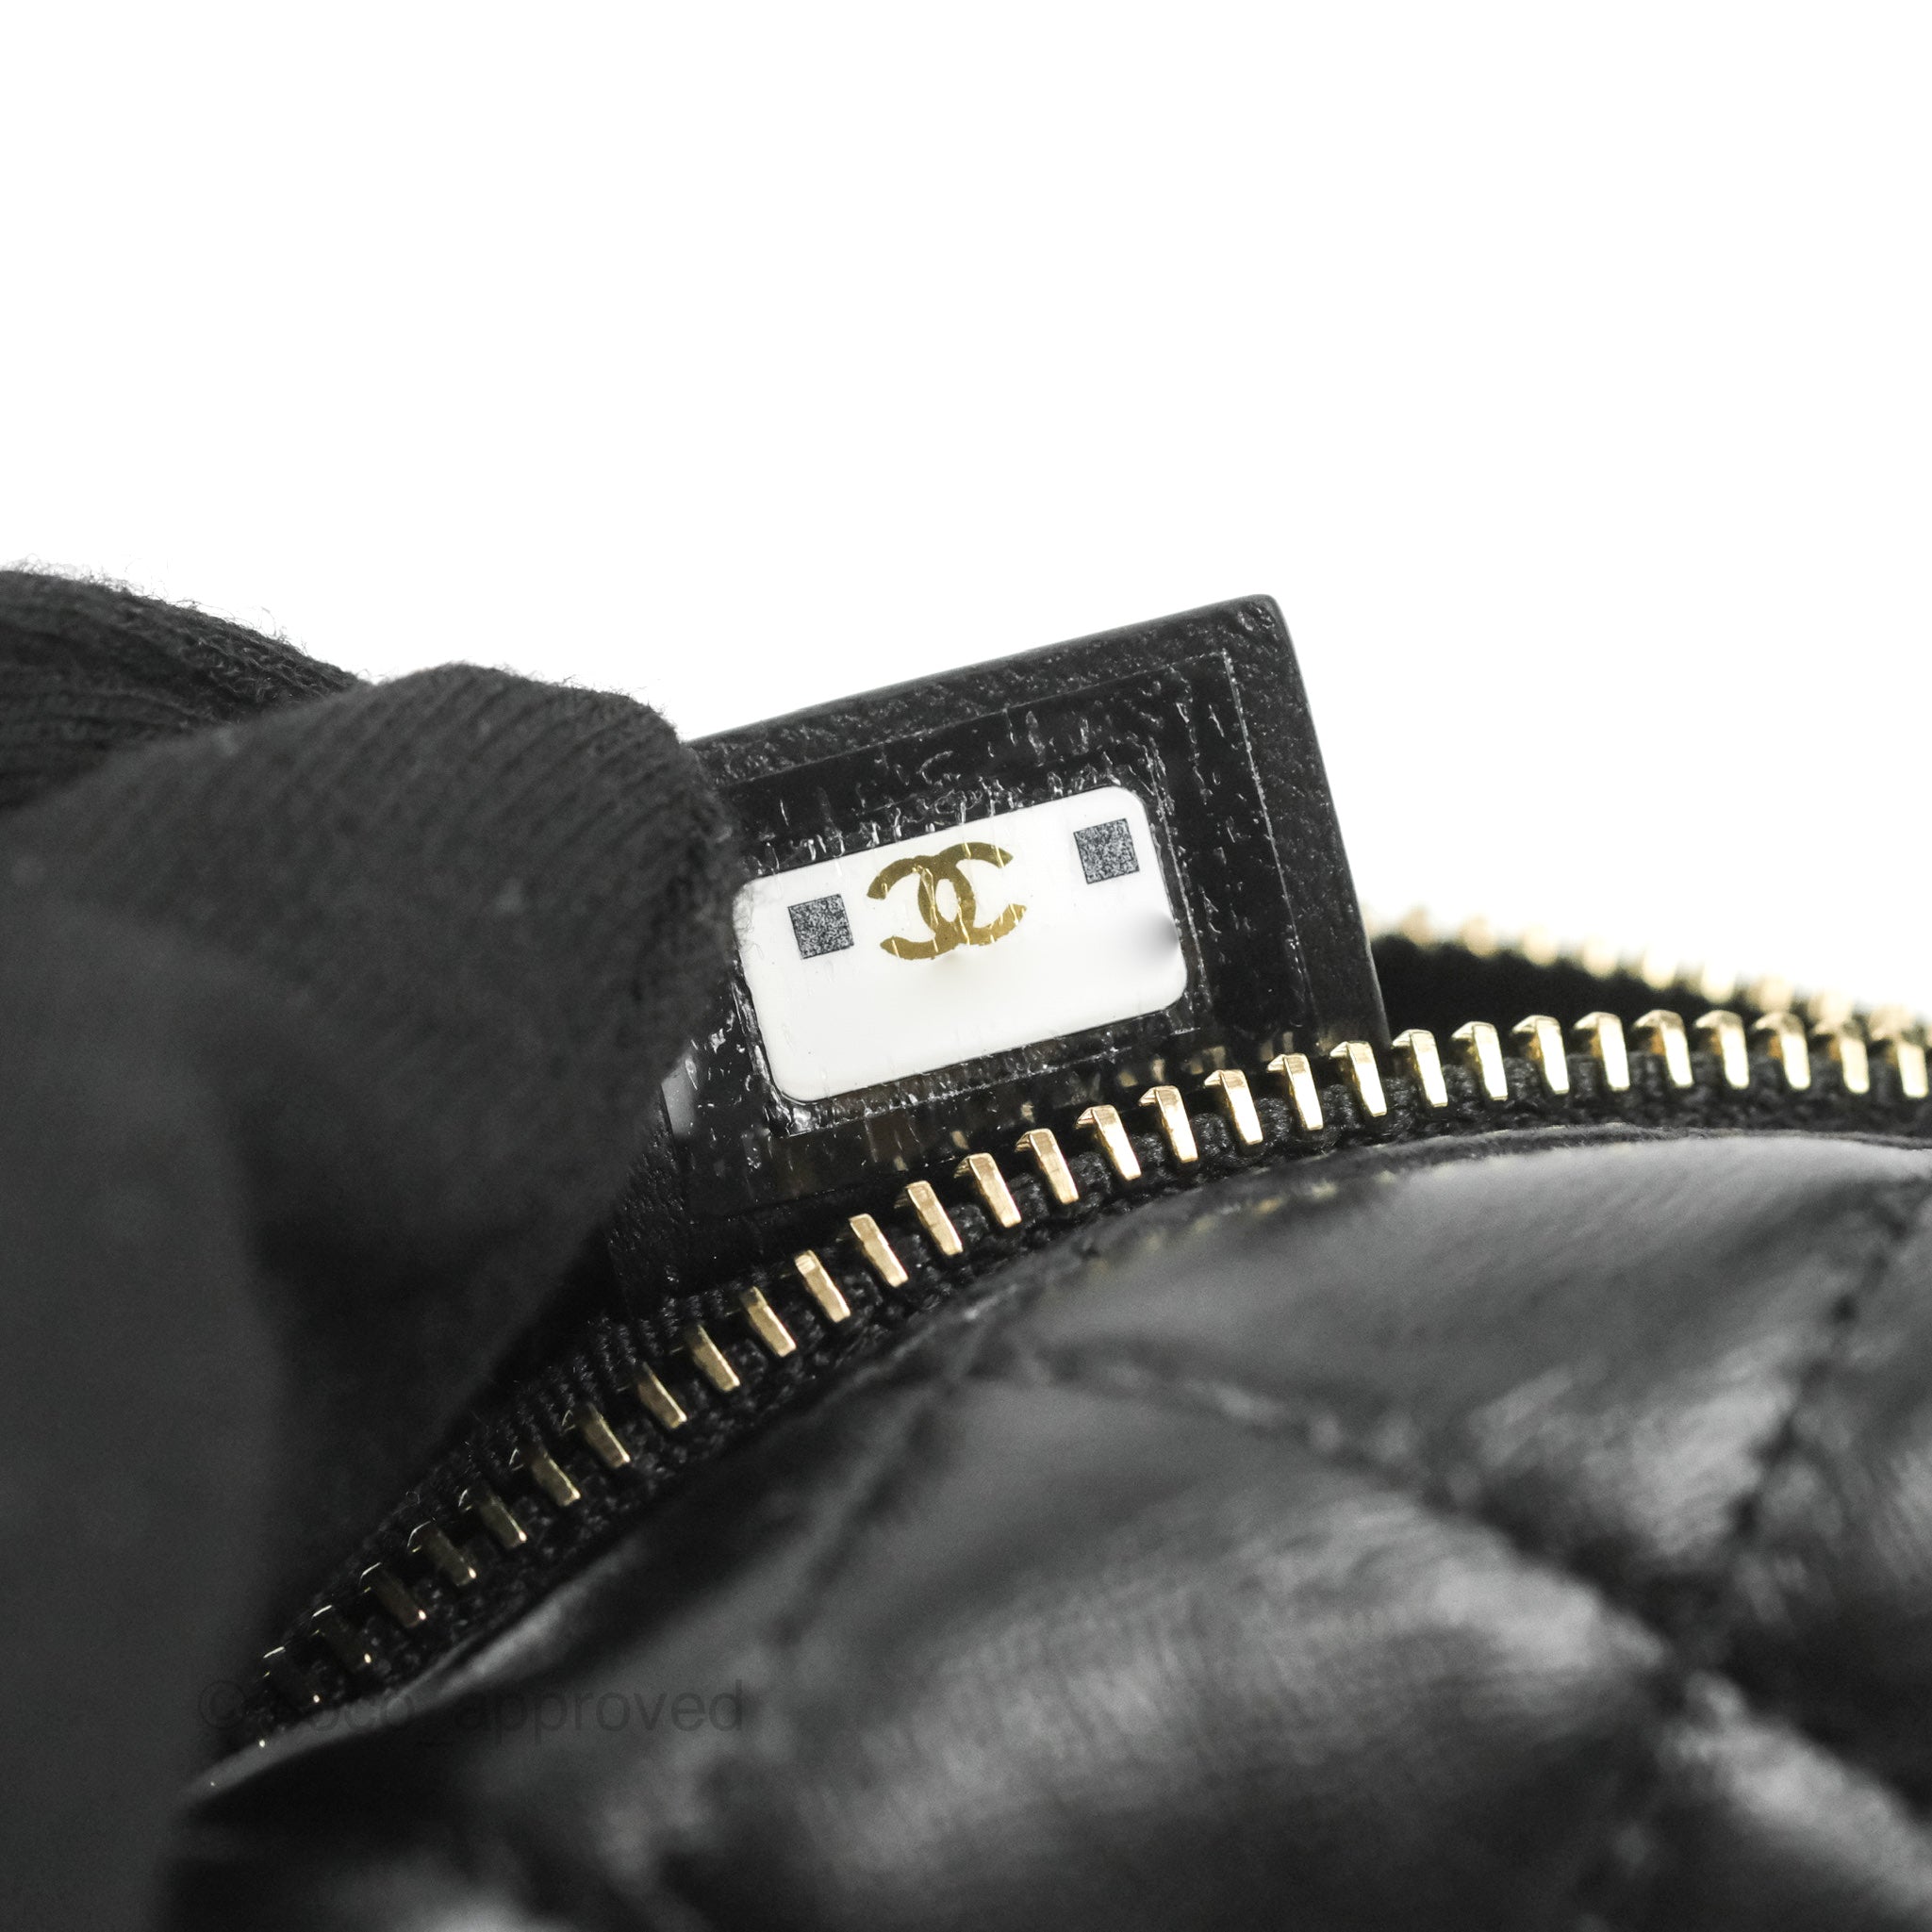 Chanel Quilted Leather Jacket